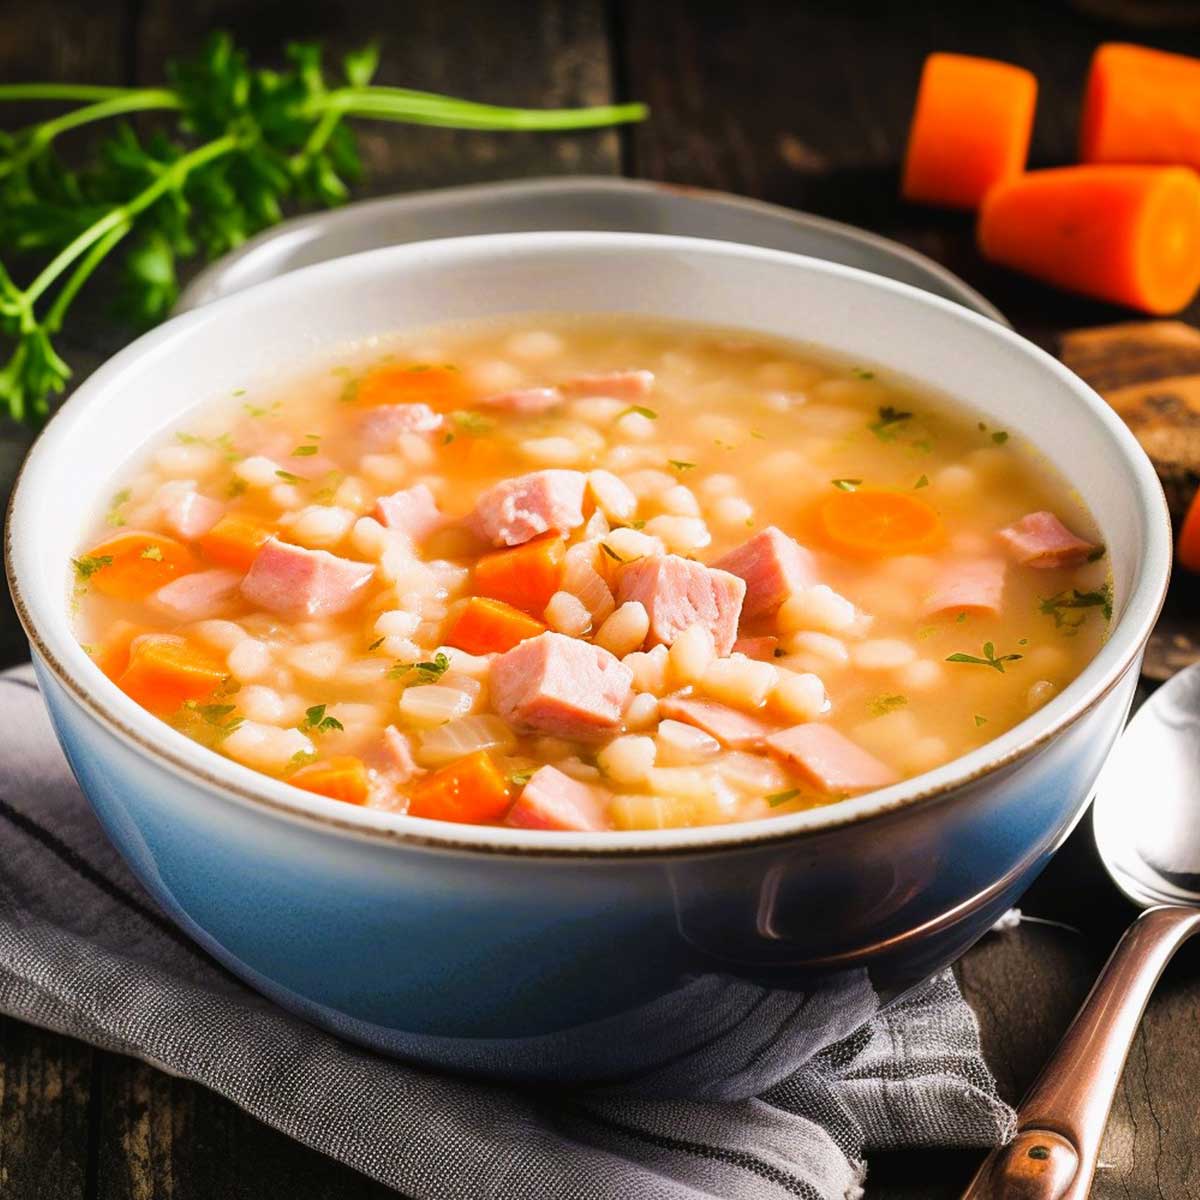 Bowl of bean soup with ham and vegetables.